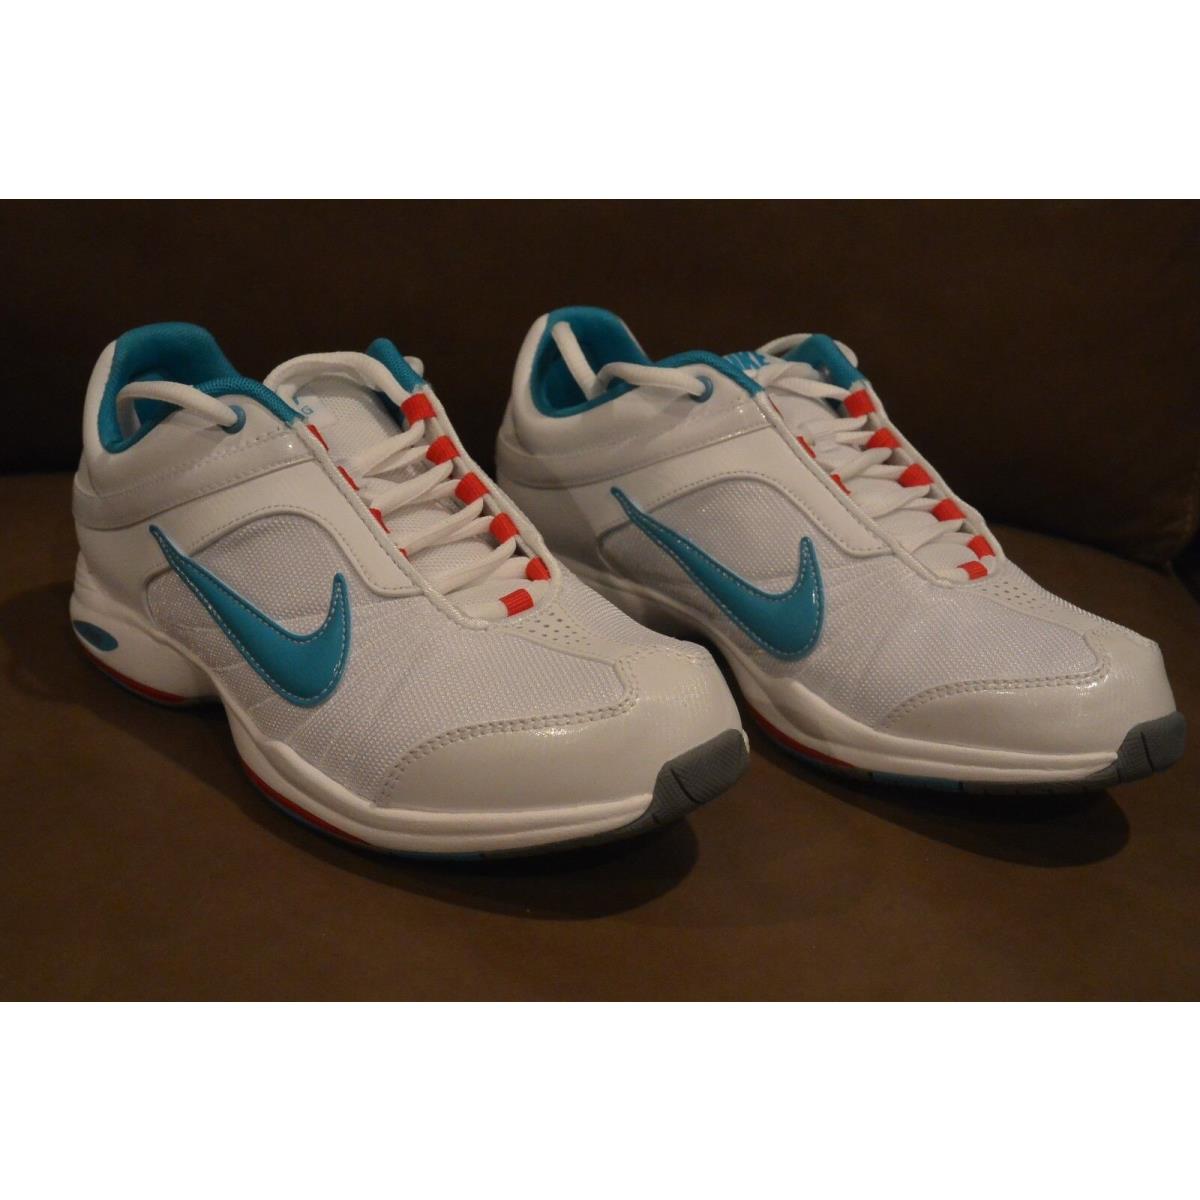 Nike Womens Air Essential Sister II Athletic Shoes Sneakers White Blue Red Sz 8